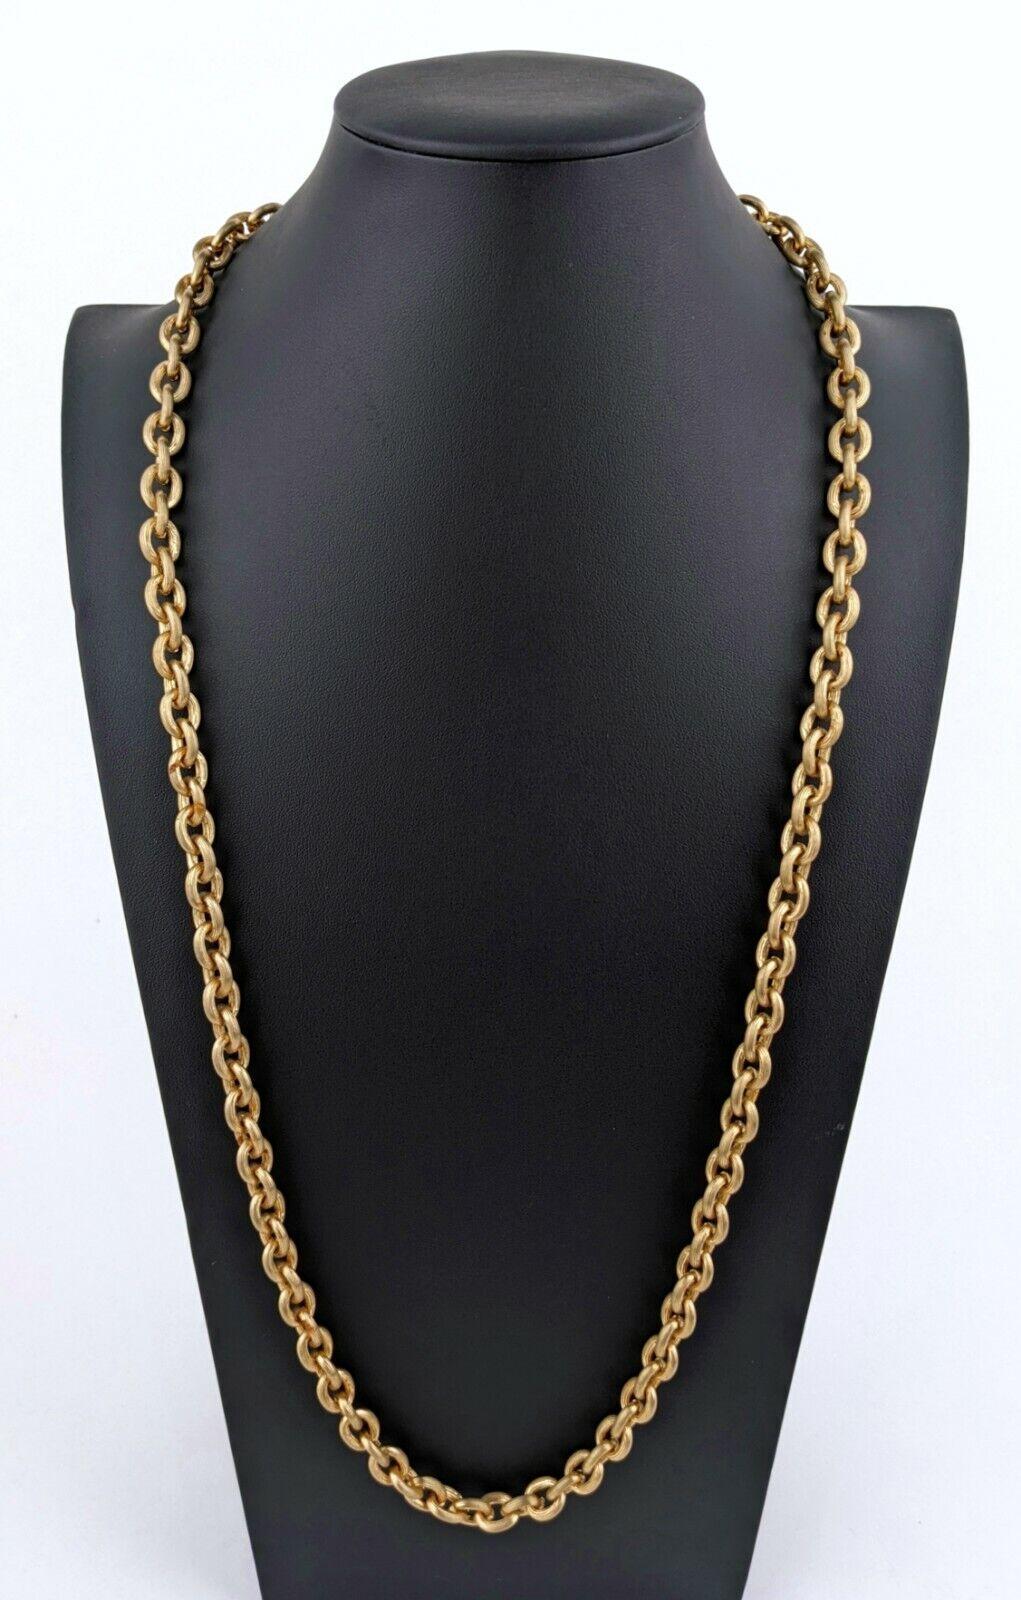 Simply Beautiful! High Quality Vintage Givenchy Mid-Century Modern Unique Designer Gold tone Open Chain Link Necklace with fabulous oversized Logo Clasp. Measuring approx. 26